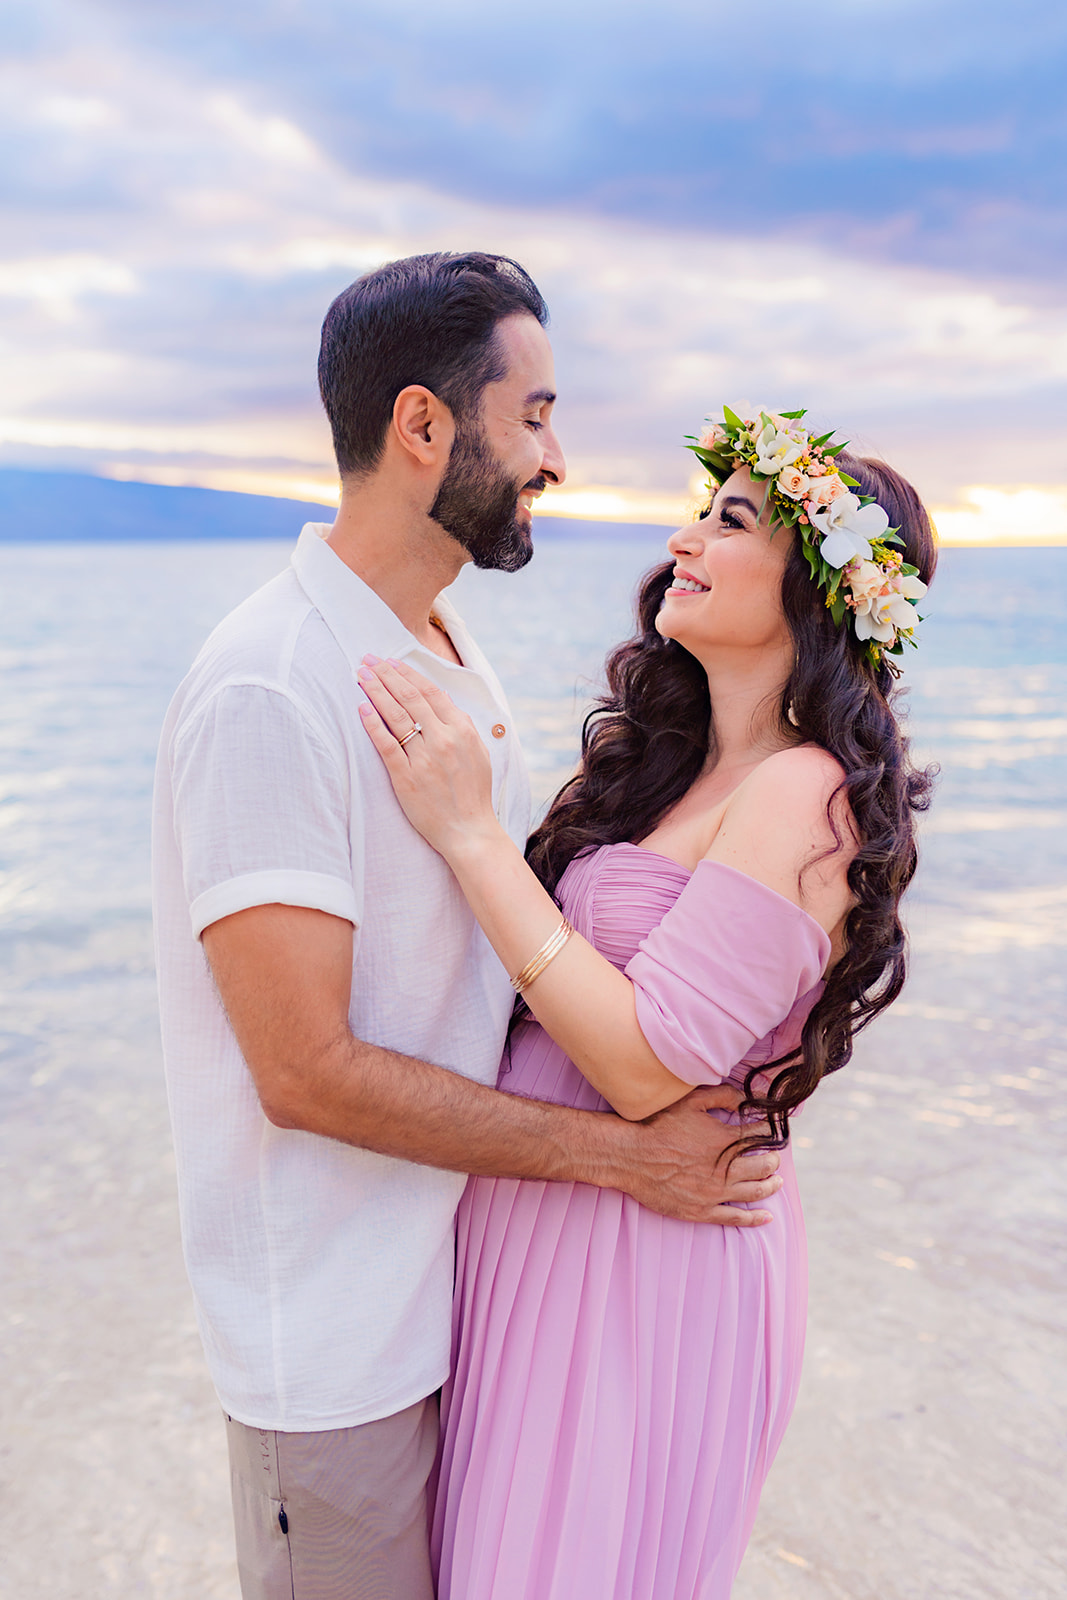 mom-to-be looks lovingly into the eyes of her partner on the beach in Maui during their maternity session